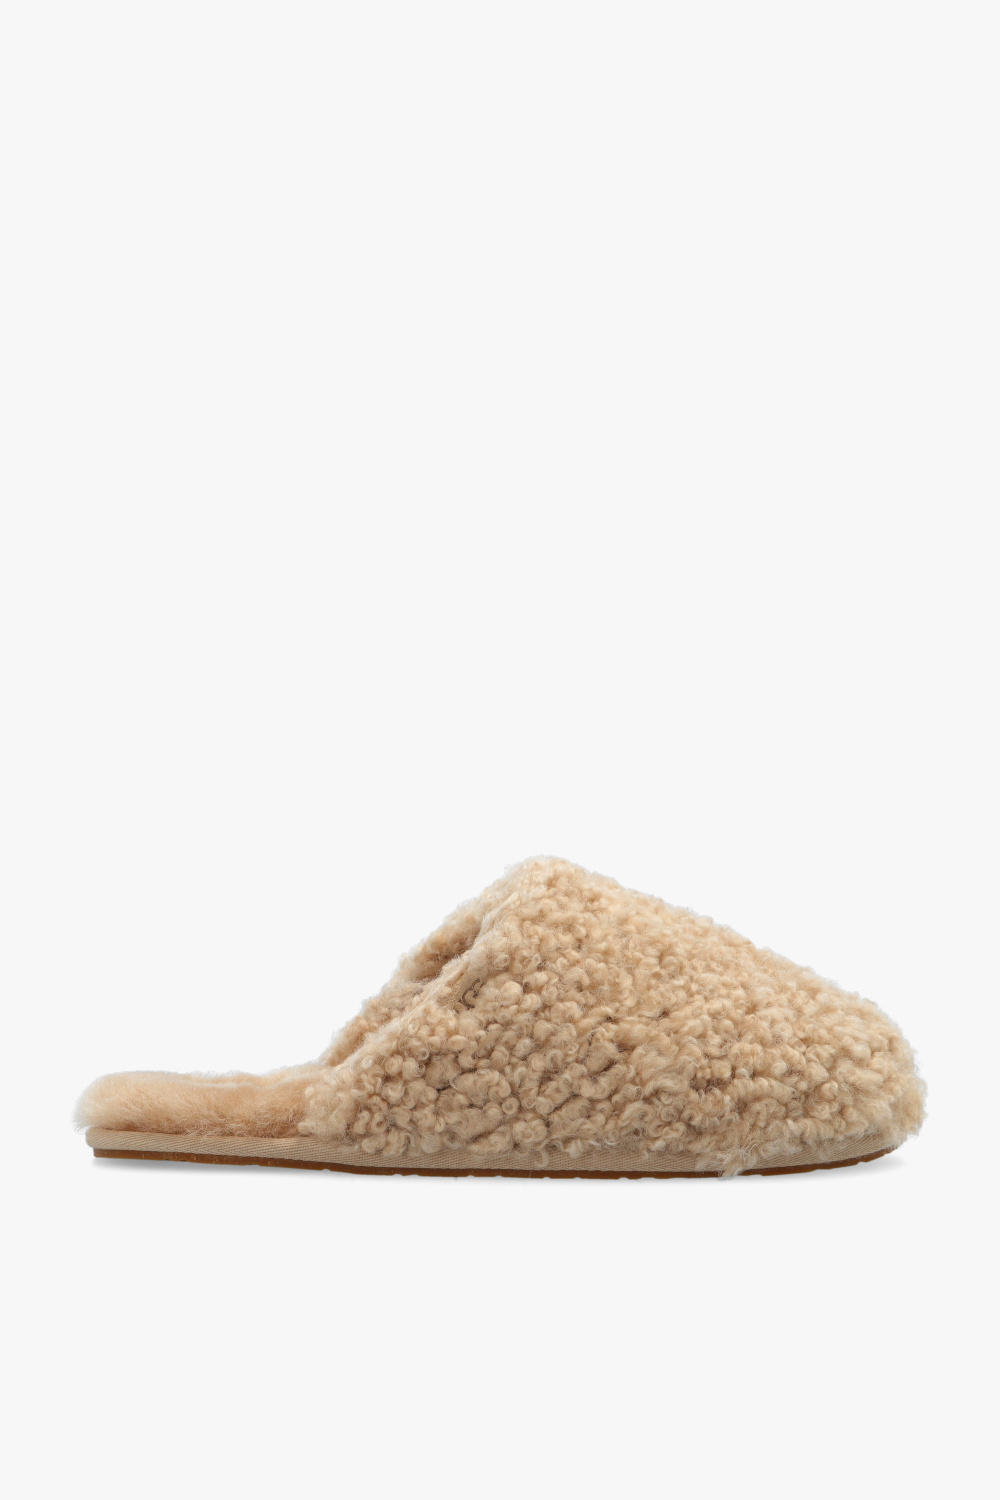 Shoes | A look inside the Ugg Australia store in Boston | UGG 'Maxi Curly Slide' StclaircomoShops